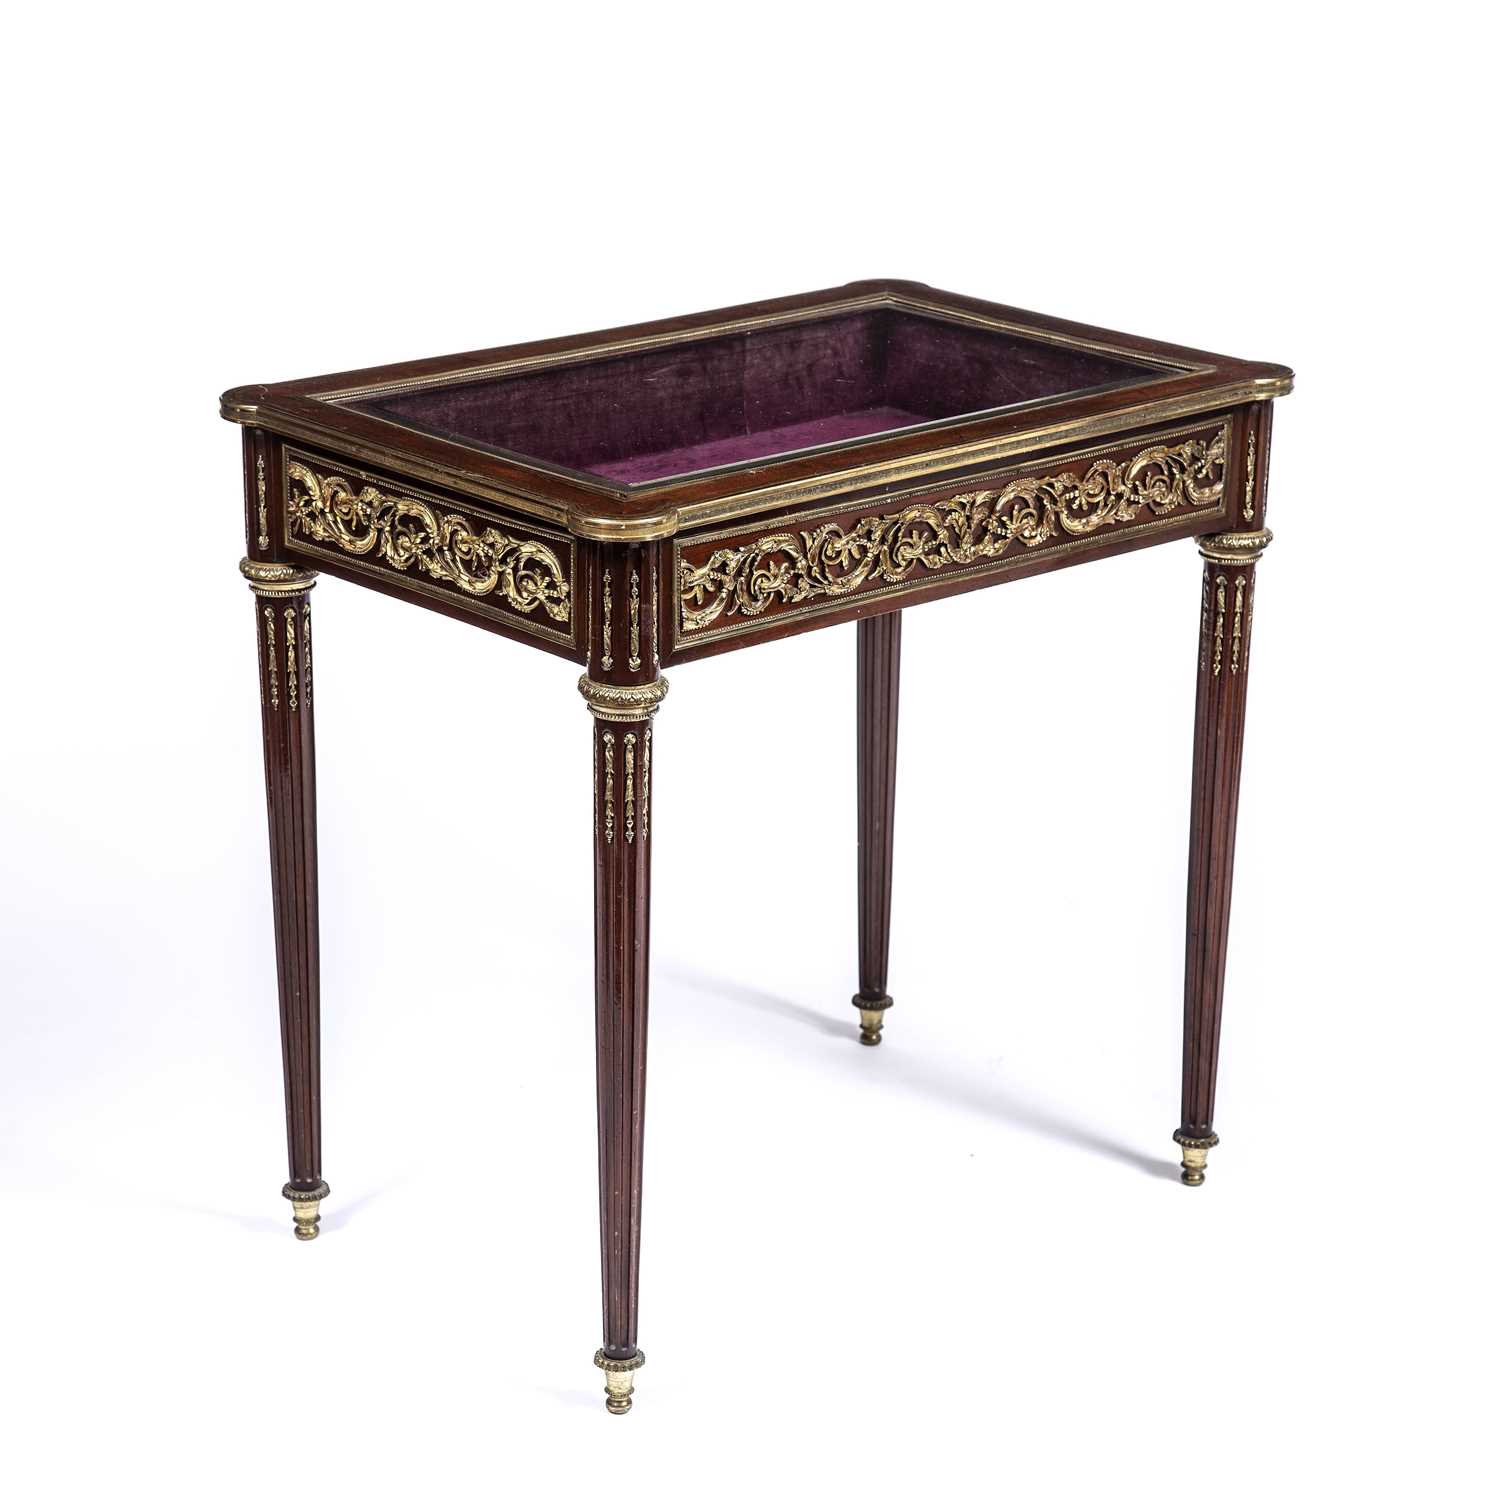 A 19th century french rosewood bijouterie table with a bevelled glass top, brass inlay and gilt - Image 2 of 6